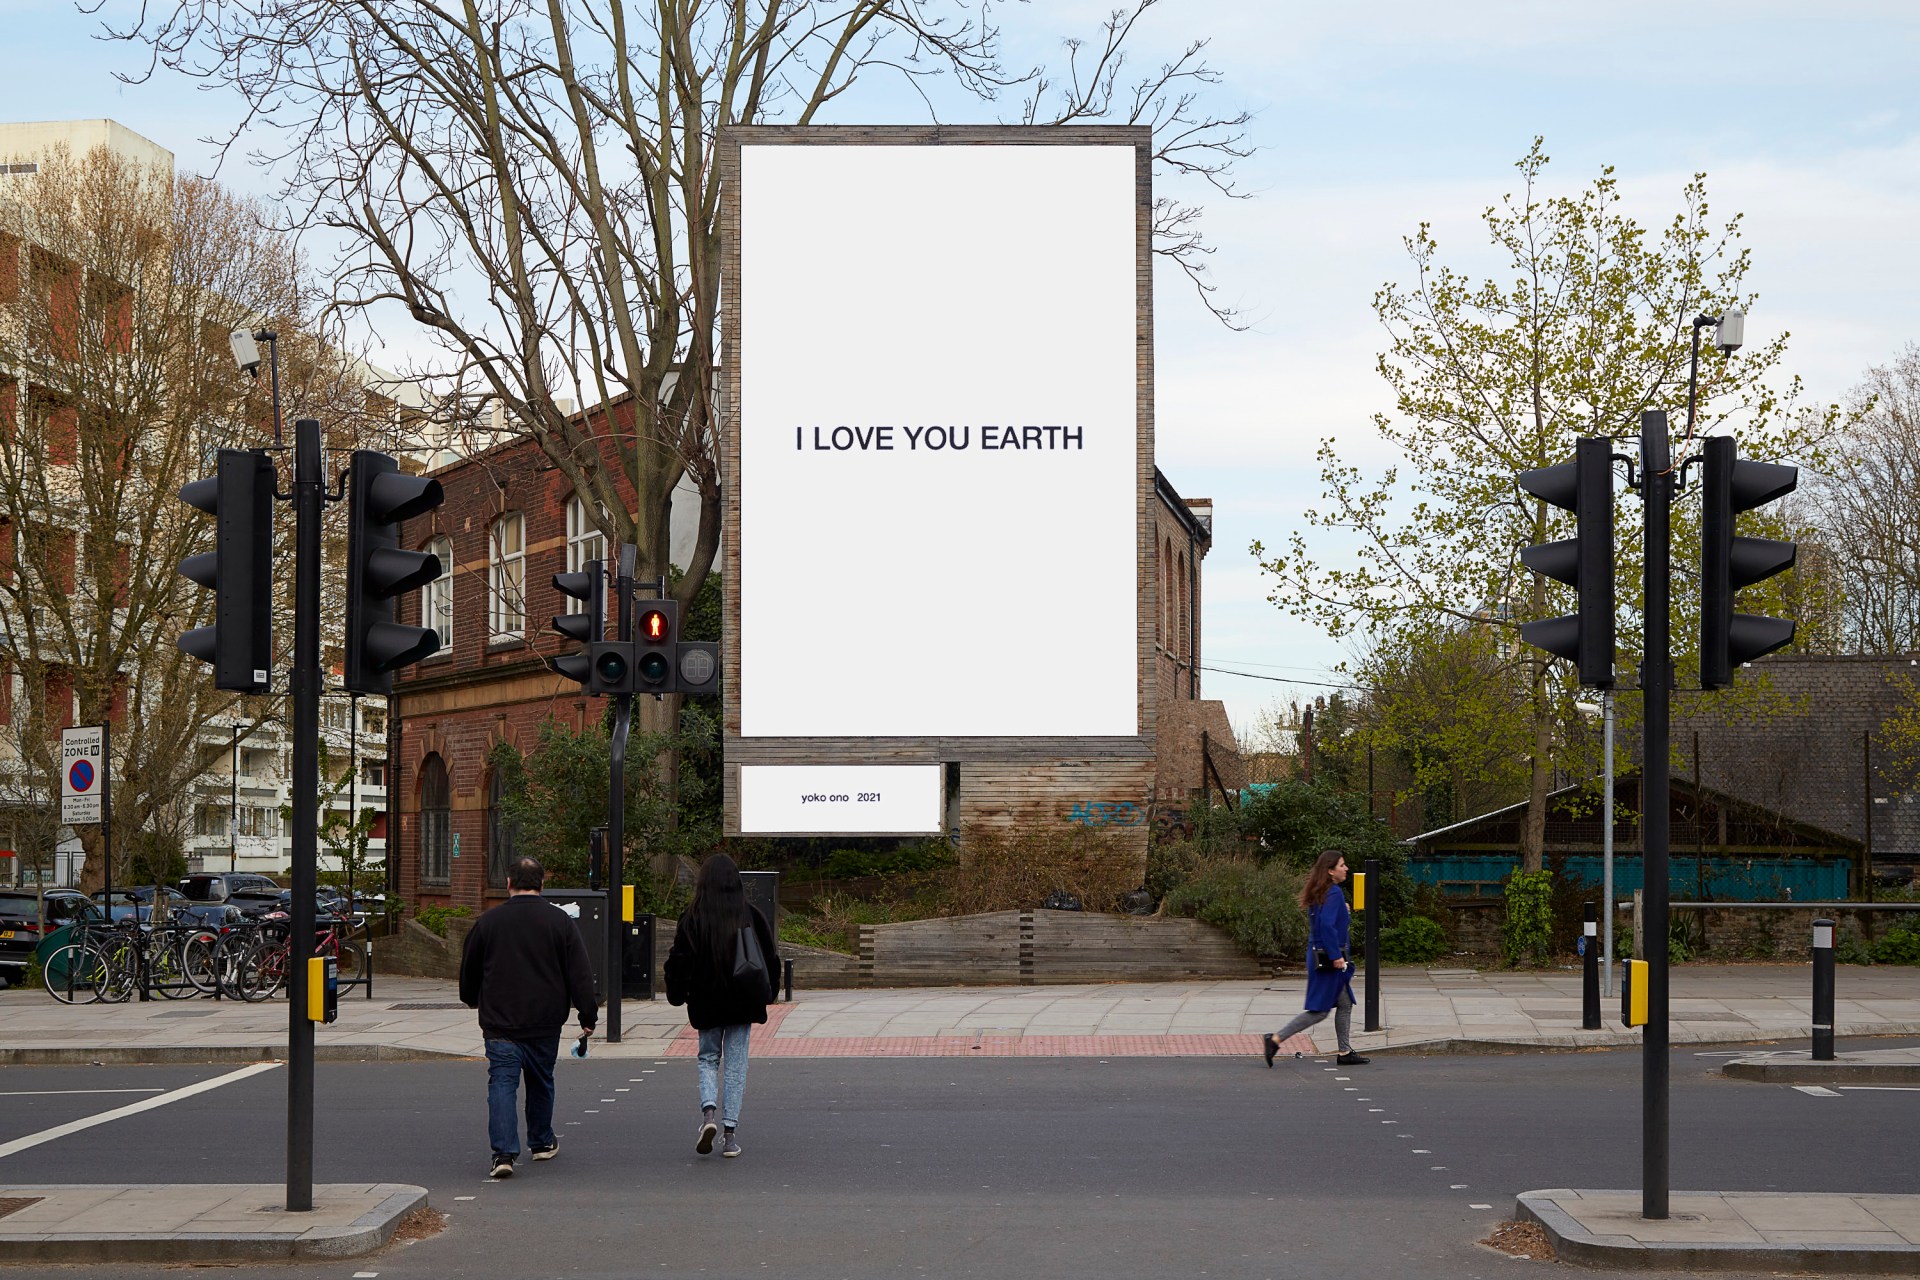 Yoko Ono, 'I LOVE YOU EARTH' (2021). Part of Serpentine’s Back to Earth project, installed to mark Earth Day 2021 at Lambeth Palace Road, London, in partnership with ClearChannel. Image credit: George Darrell.